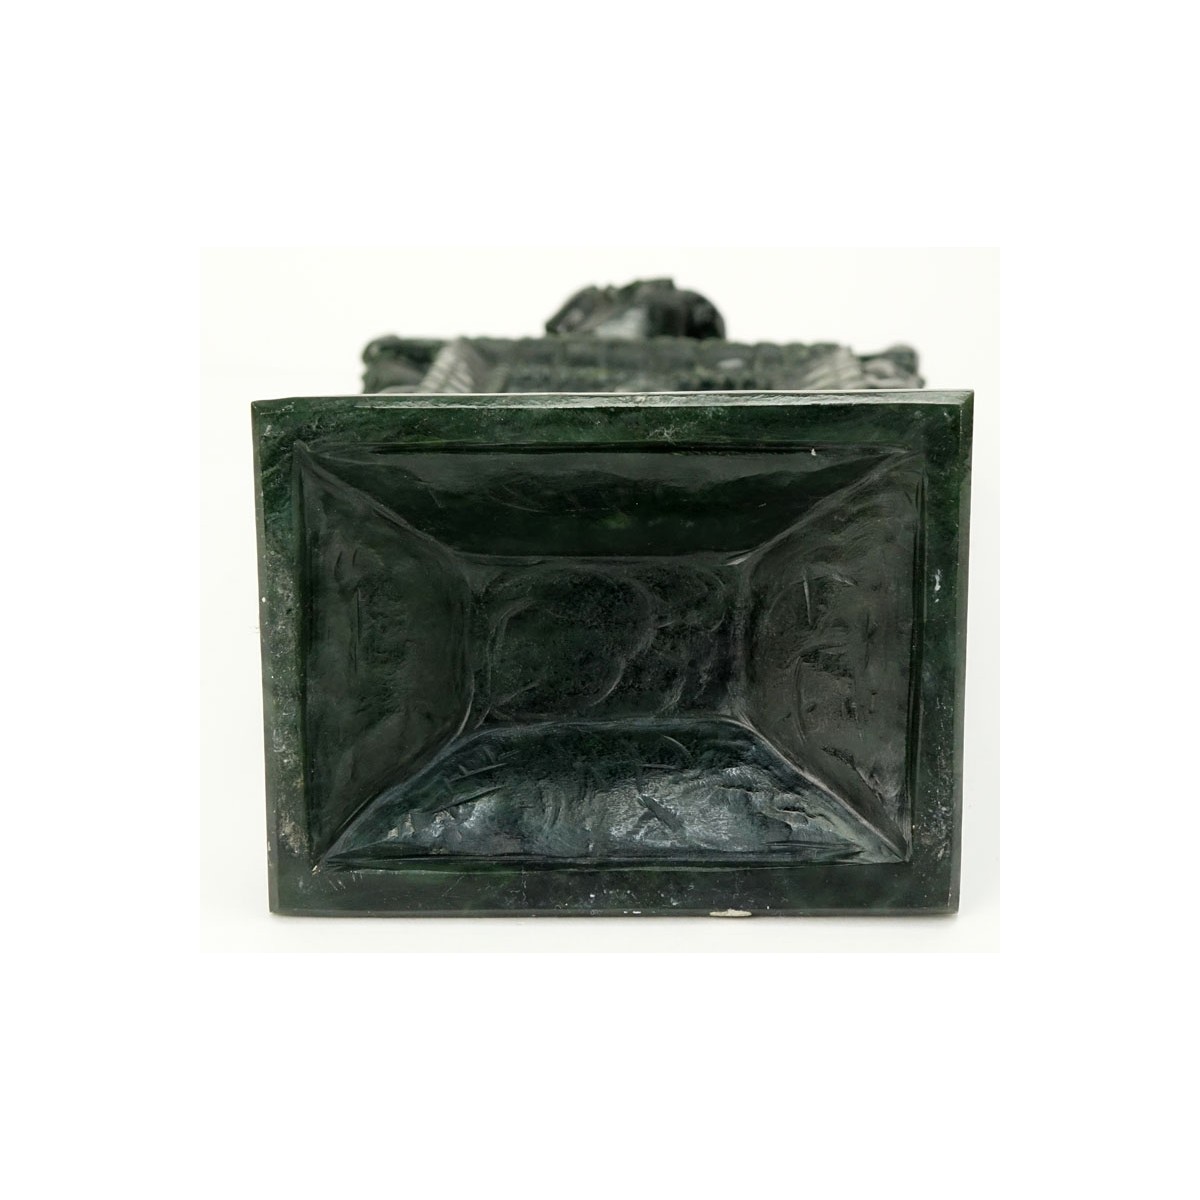 Early 20th Century Chinese Carved Dark Green Jade Ceremonial Plaque. Seated